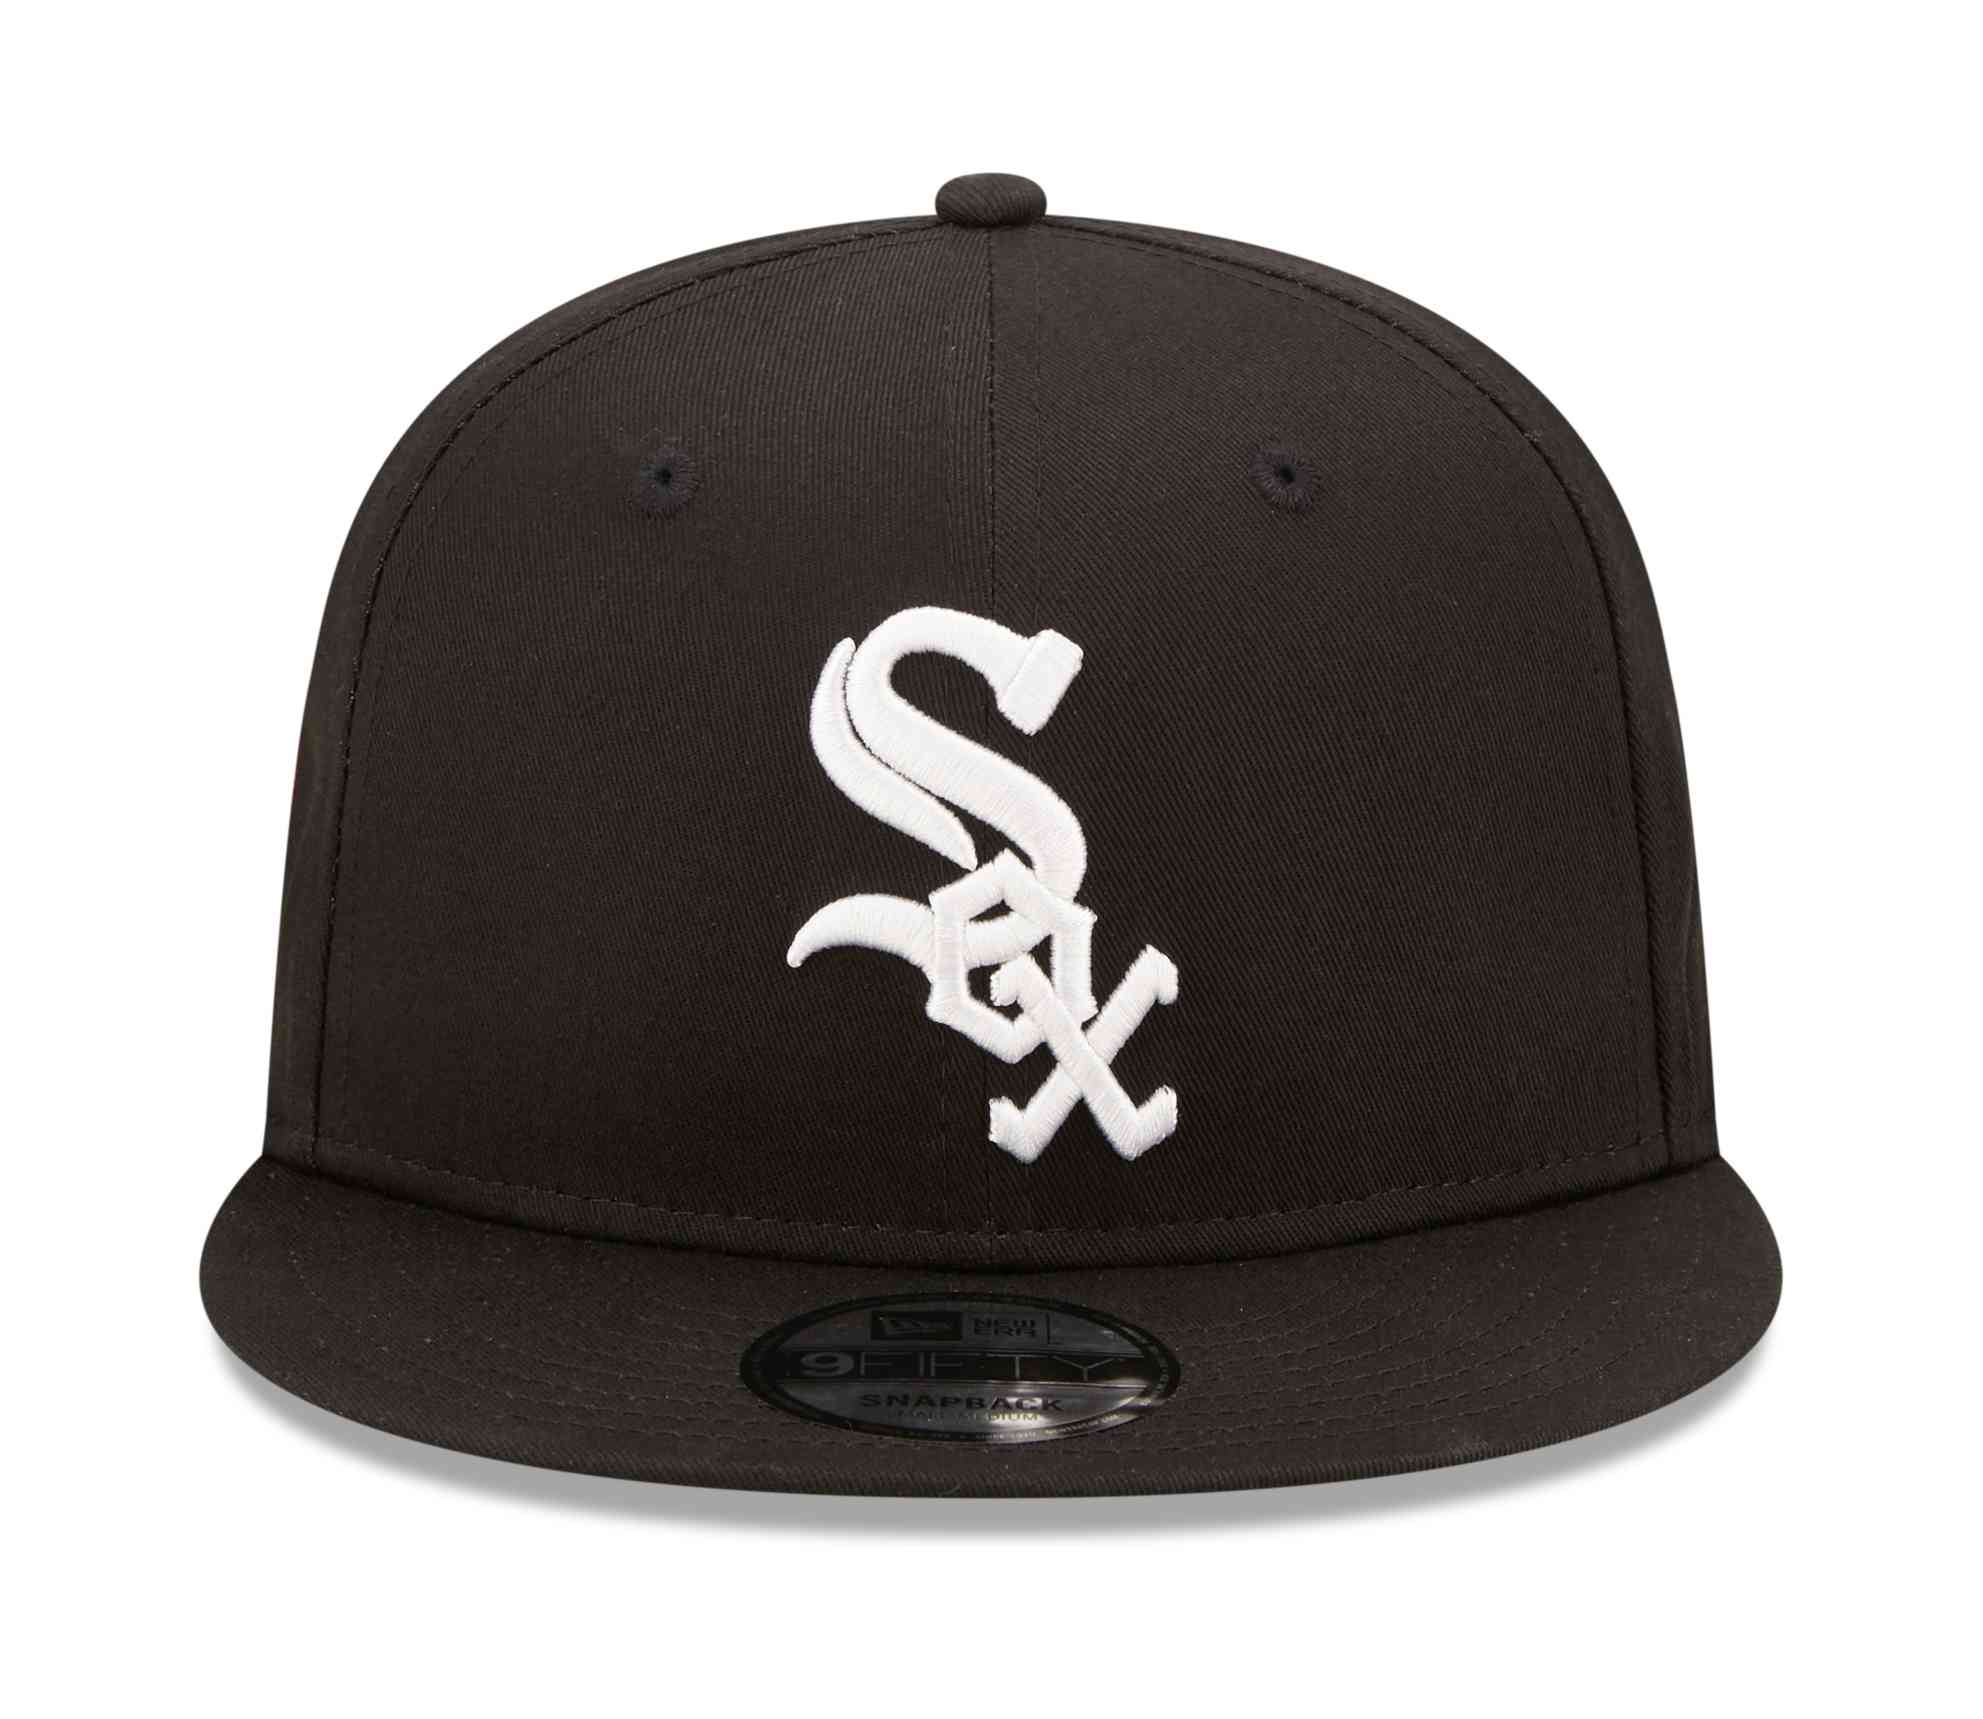 New Era - MLB Chicago White Sox Team Side Patch 9Fifty Snapback Cap